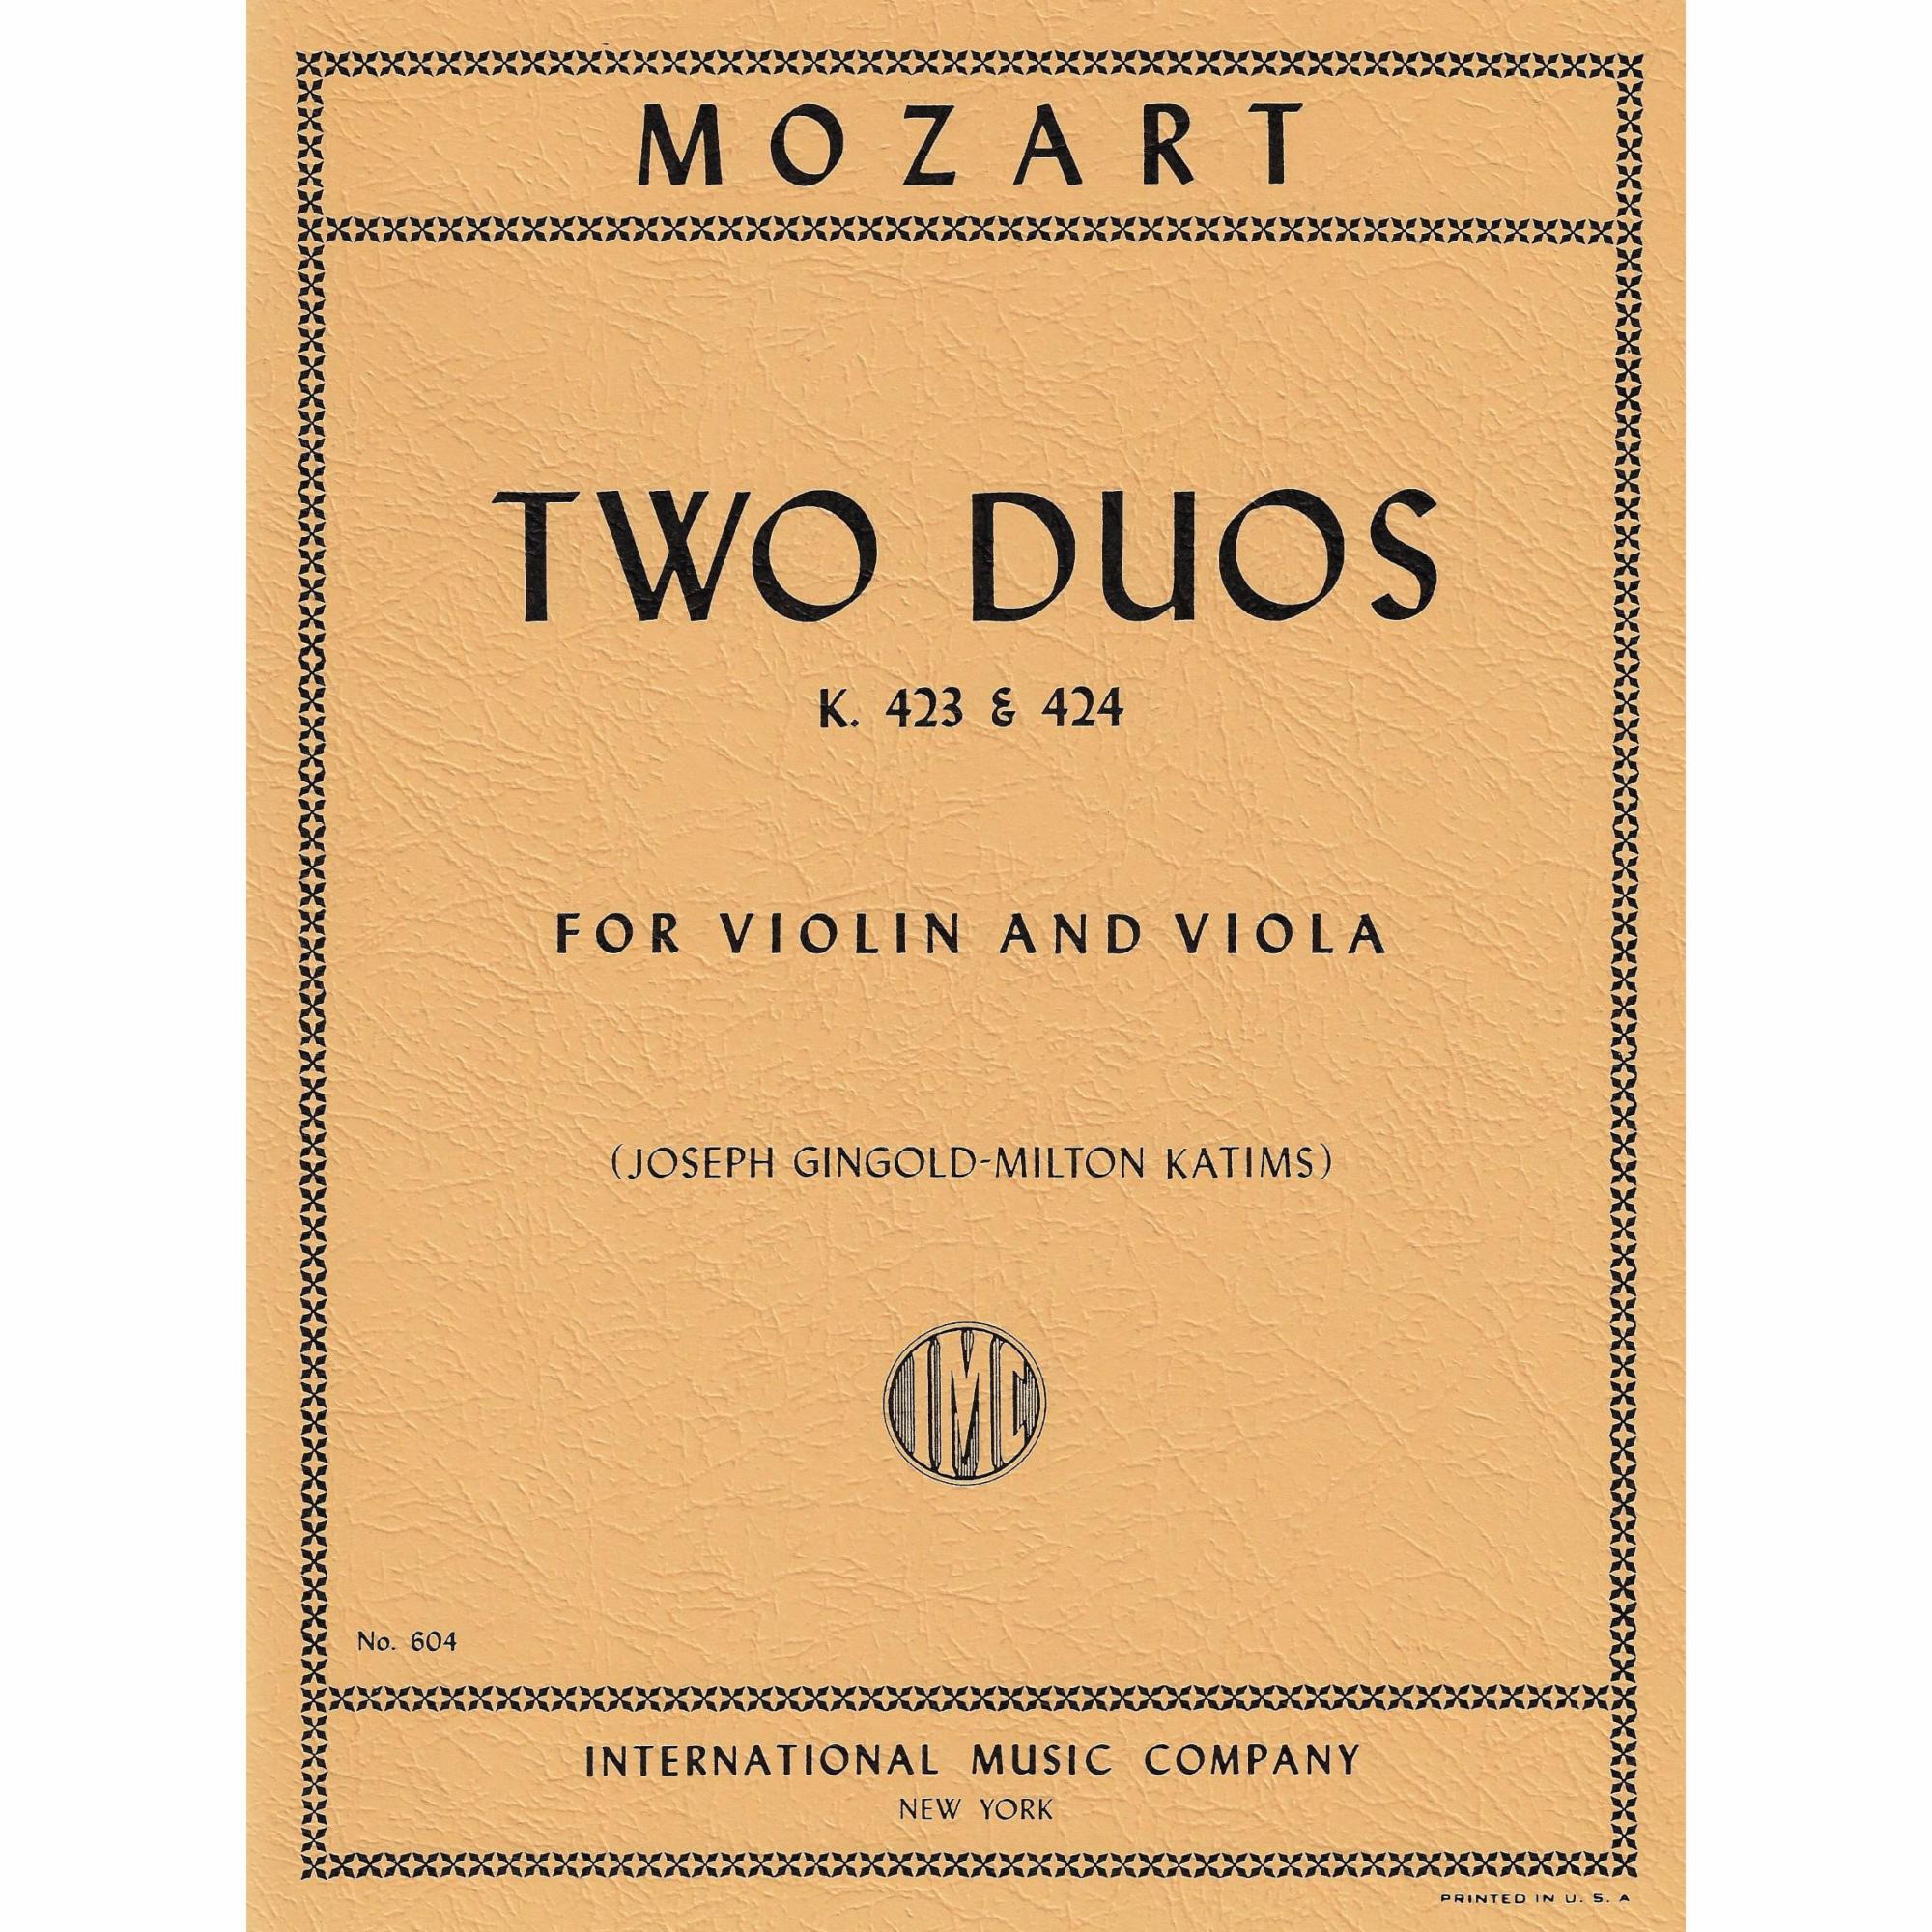 Mozart -- Two Duos, K. 423 & 424 for Violin and Viola